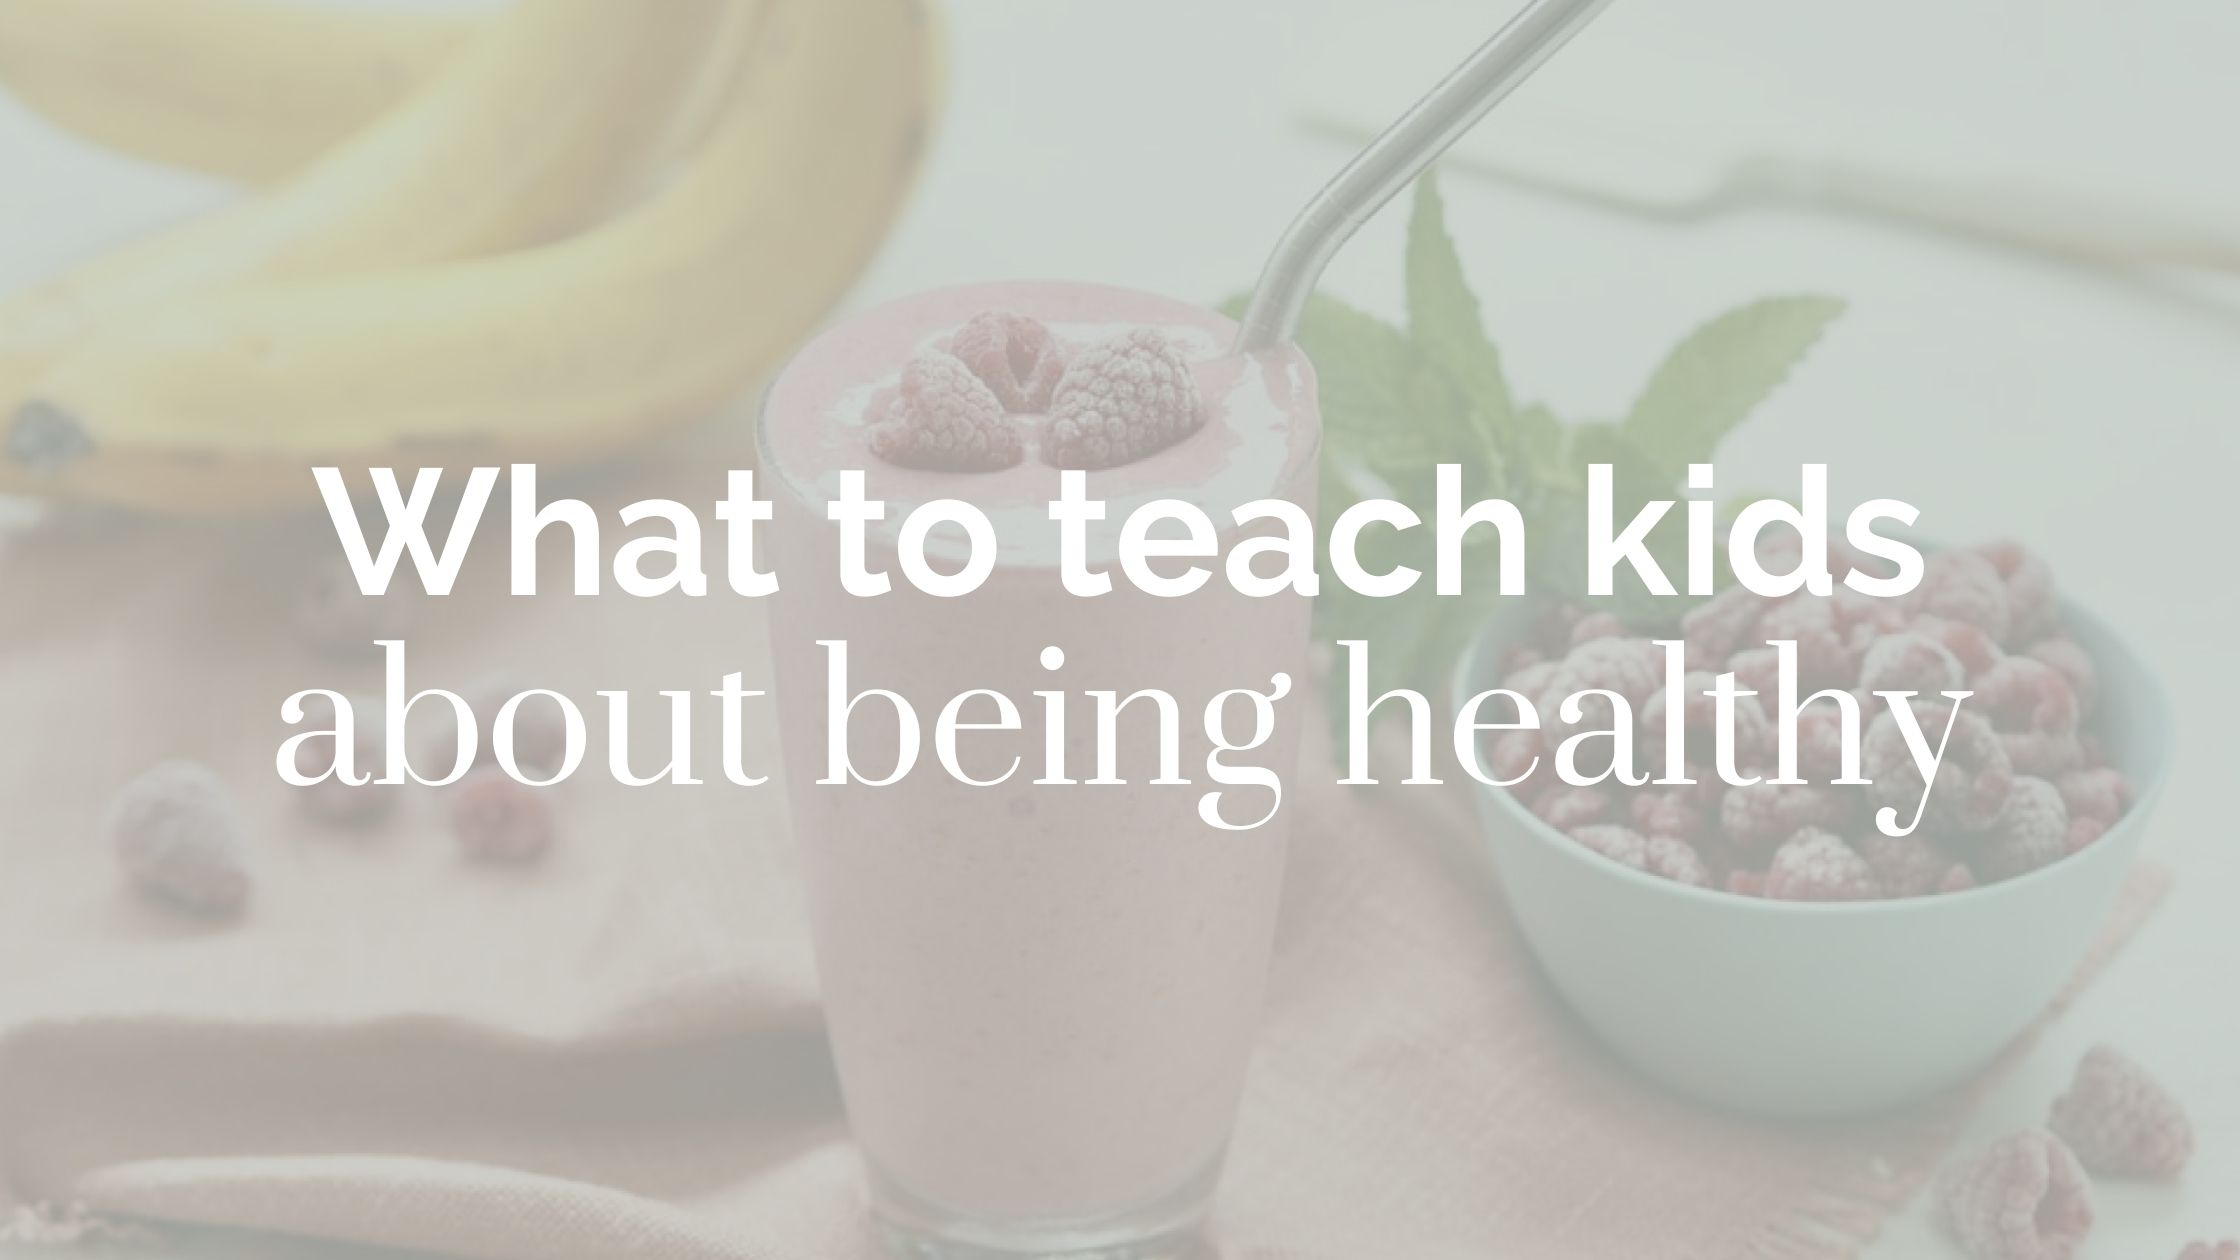 What to teach kids about being healthy